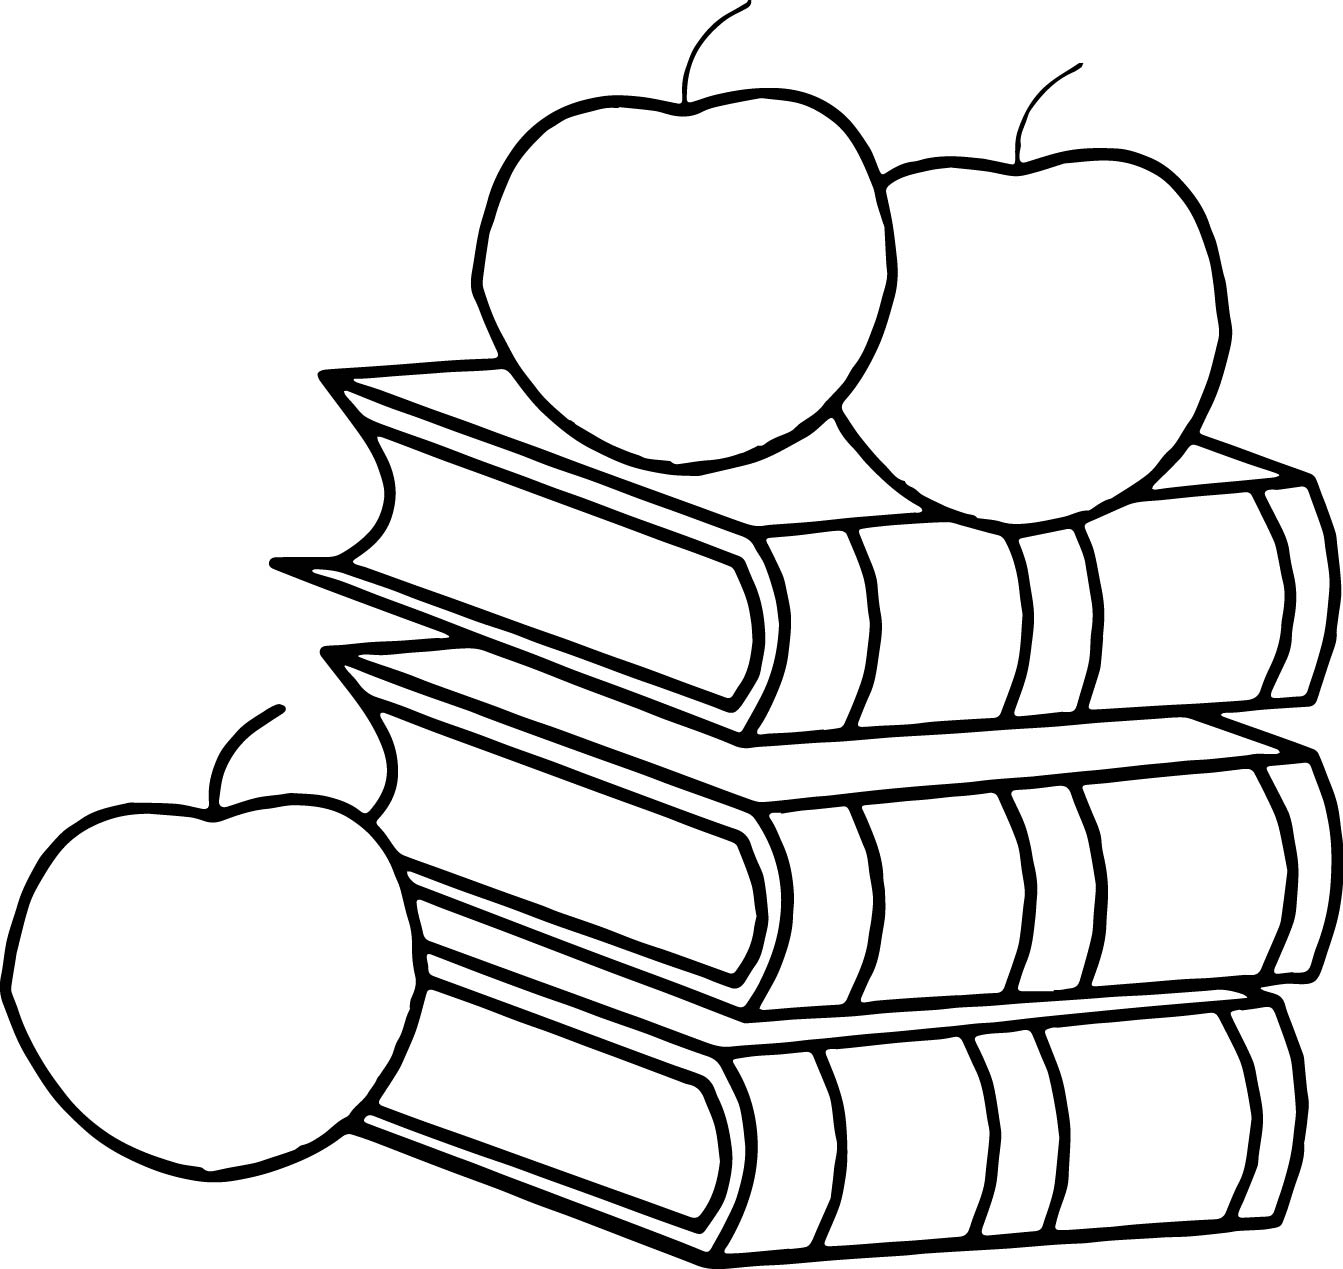 Third Grade Coloring Pages at GetColoringscom Free